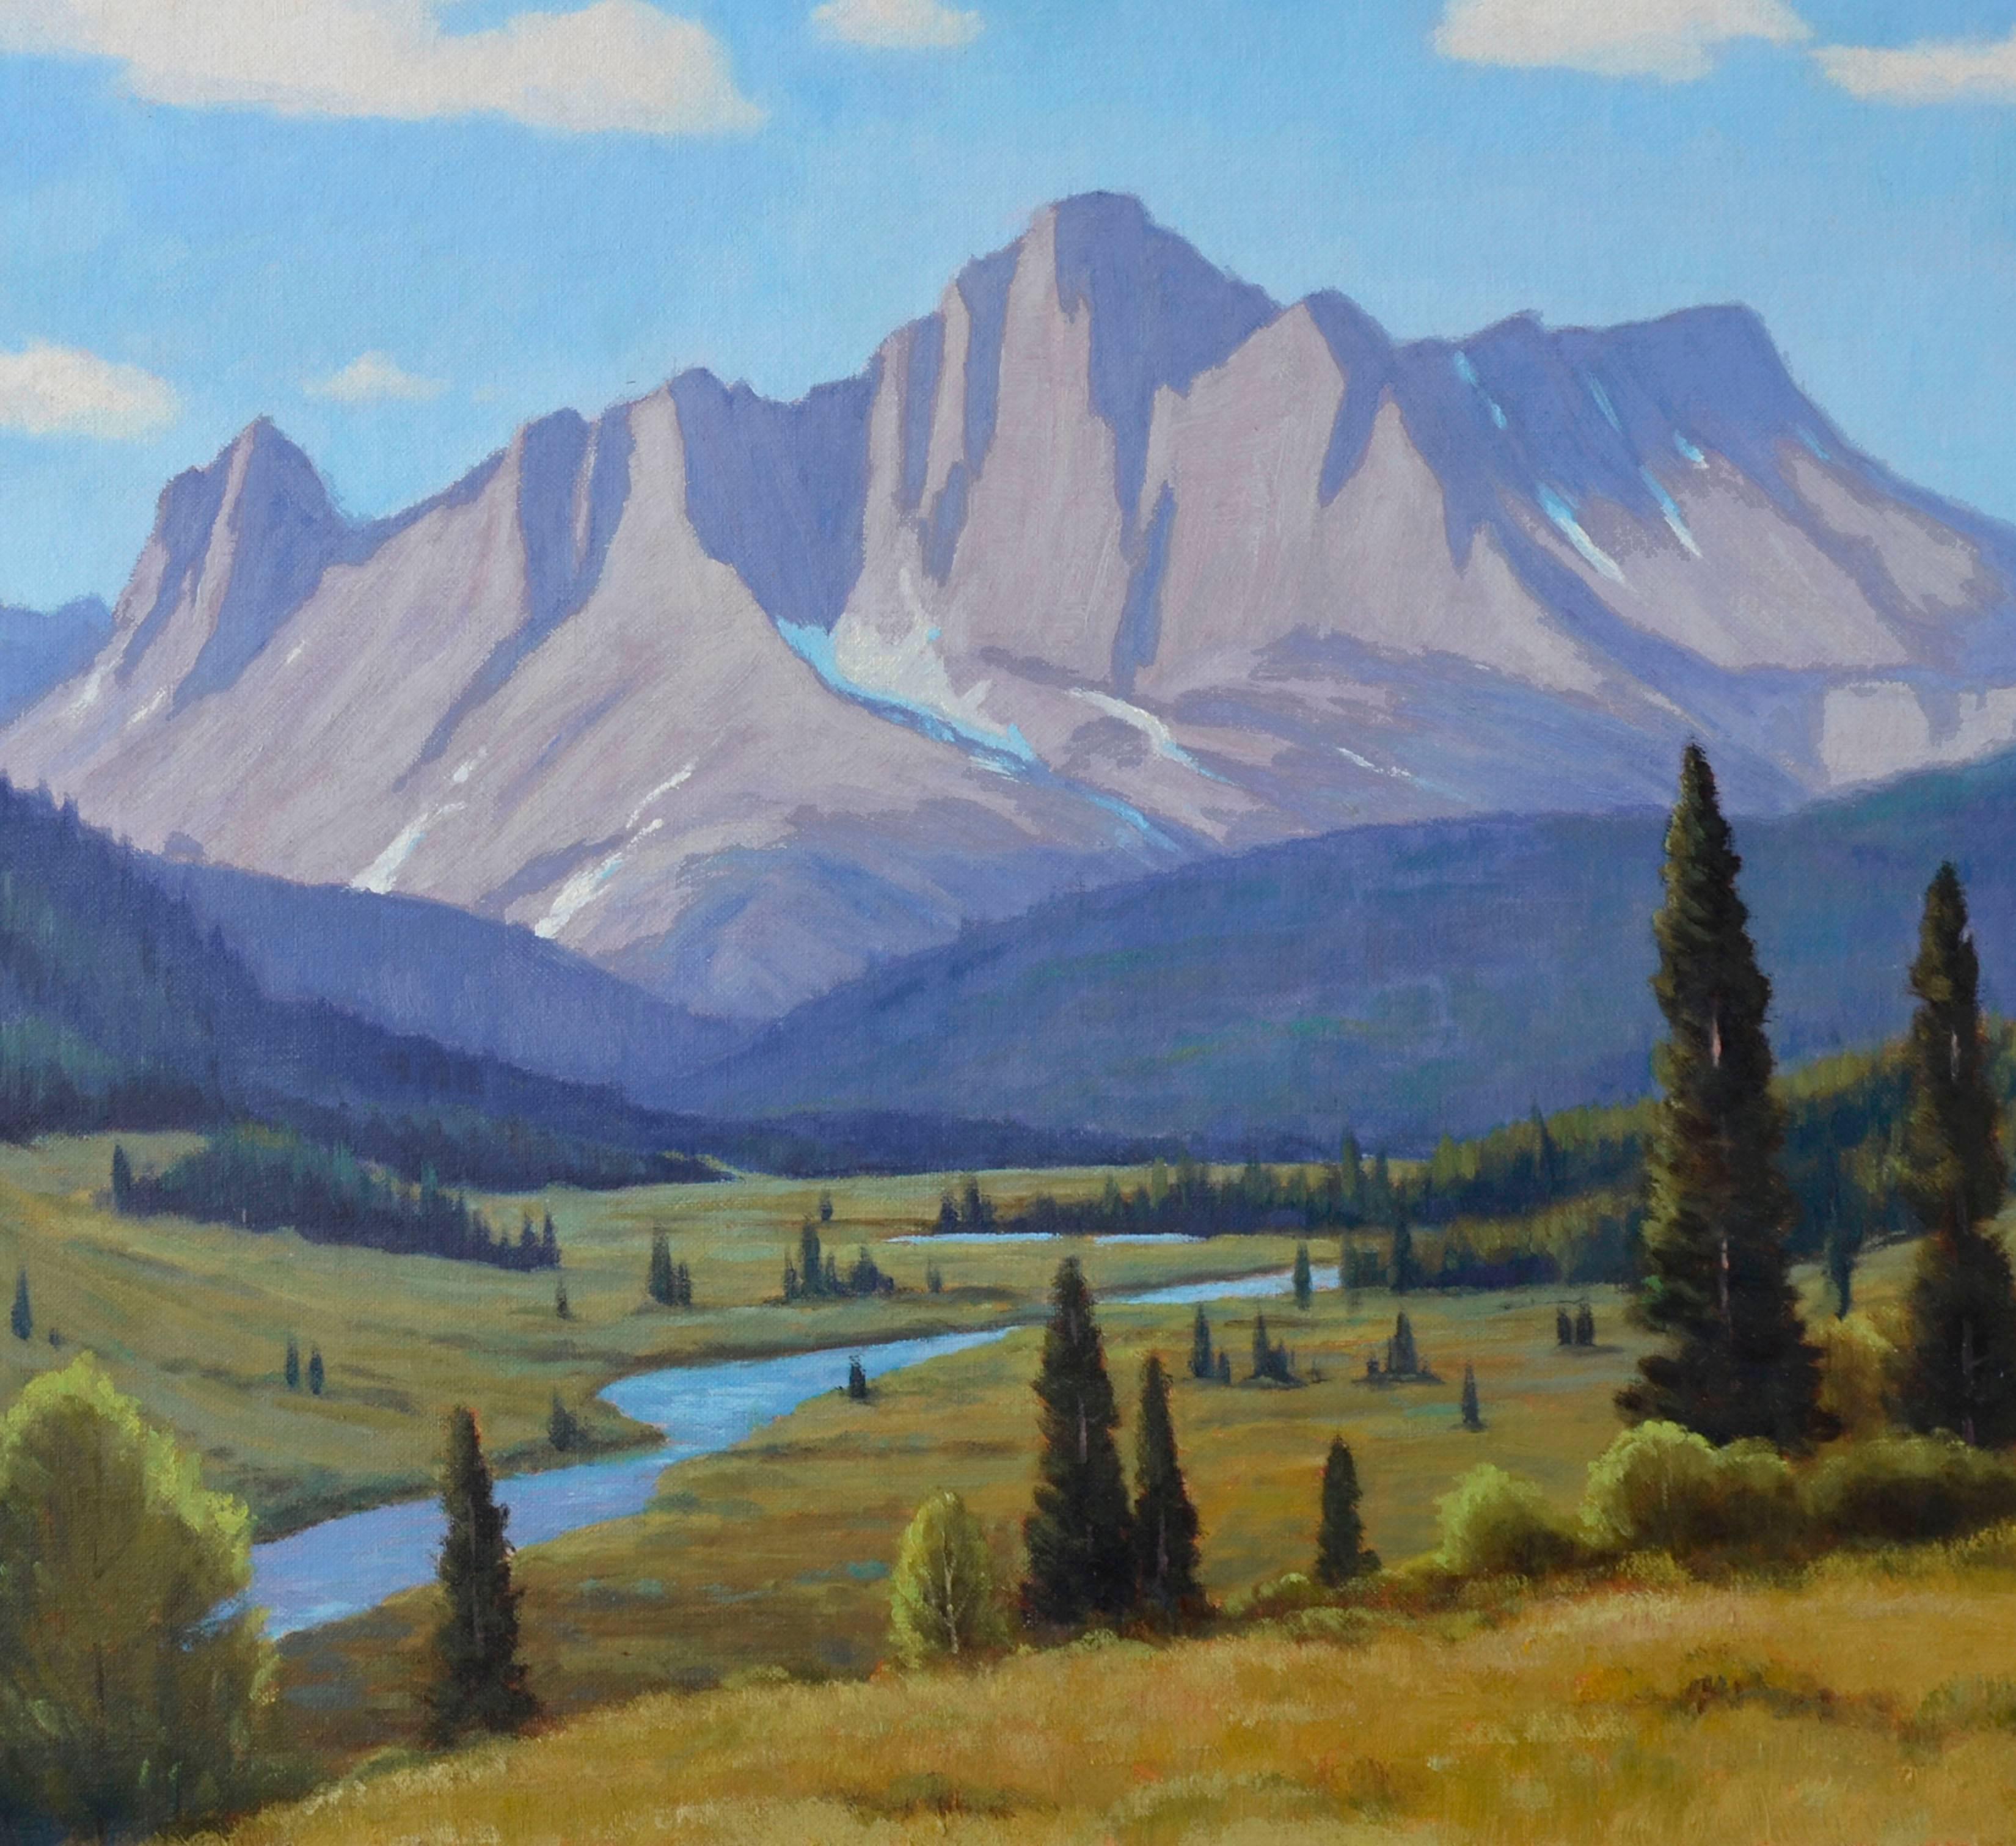 Cataract Creek, Alberta - Canadian Mountain River Valley Landscape  - Painting by Lloyd C. Laverick